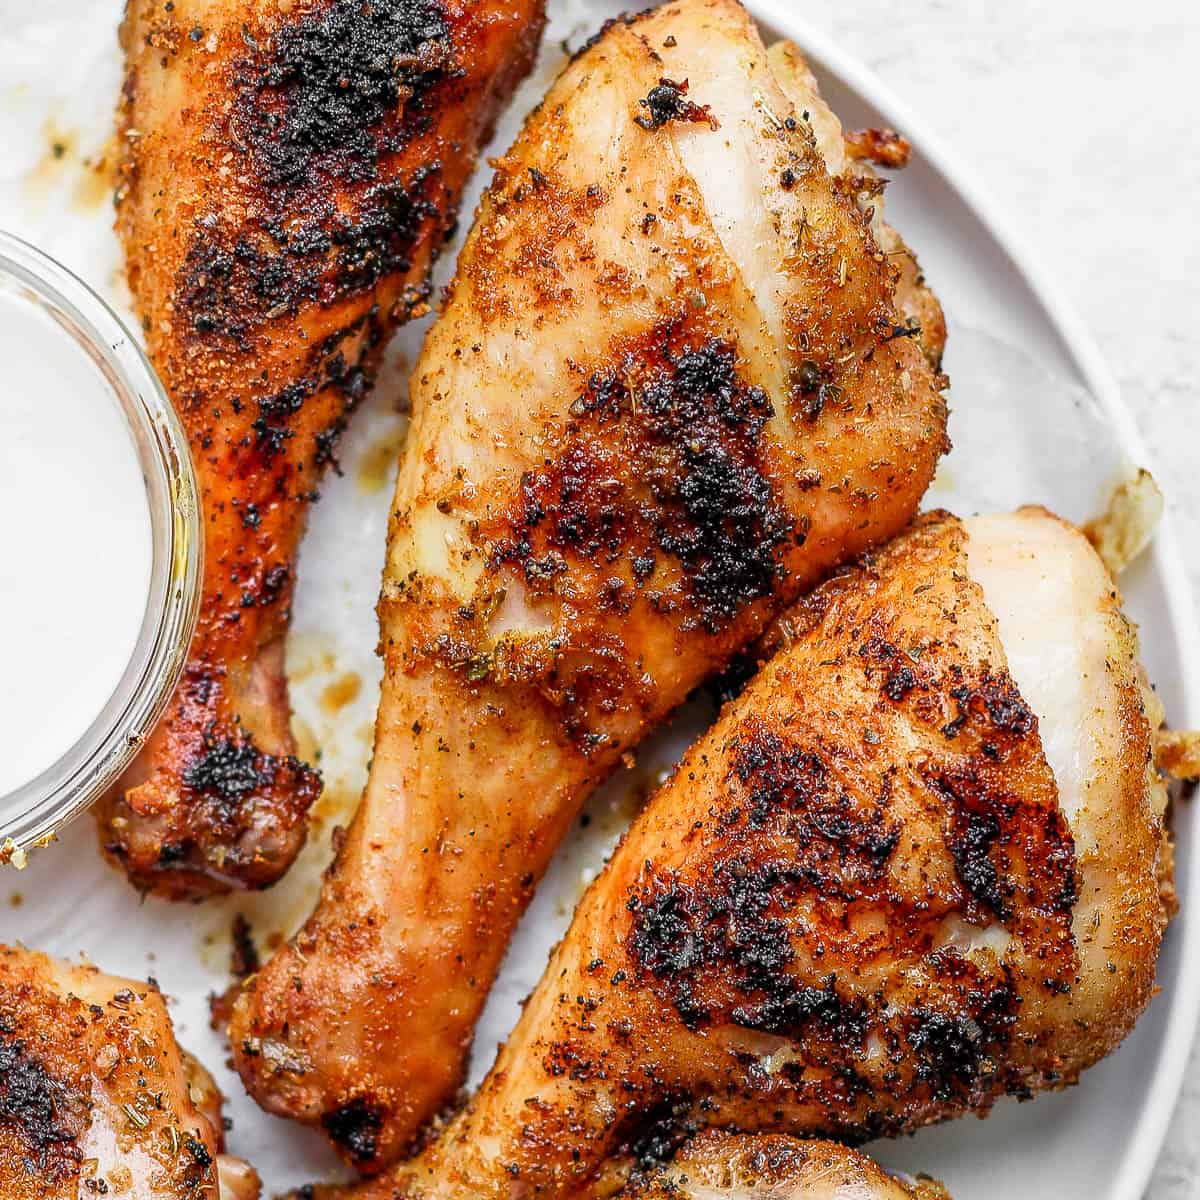 Grilled Chicken Legs (+ dry rub) - The Wooden Skillet